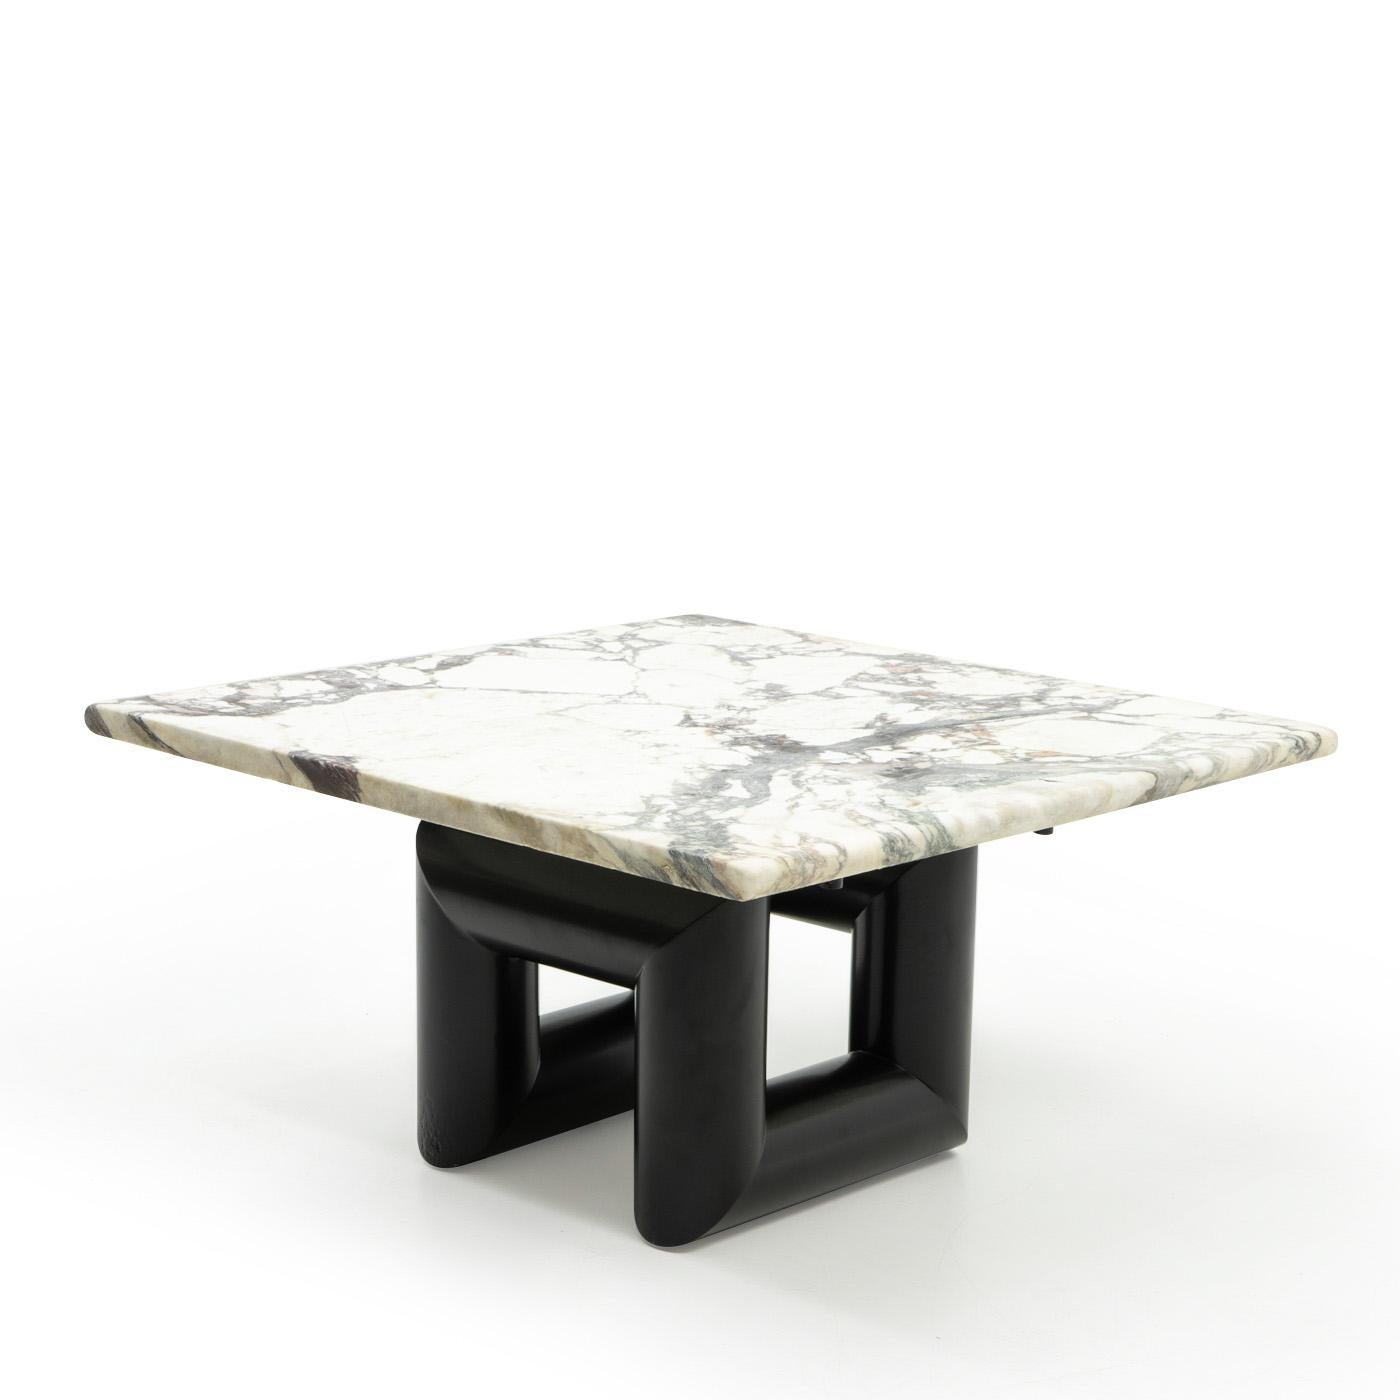 Custom designed coffee table by Mario Botta, produced by Alias (Italy) for the Ransila Building 1, Lugano, Switzerland:

This marble top coffee table is an adjustment of the serie-produced Terzo dining table (1980s) specifically designed for use in